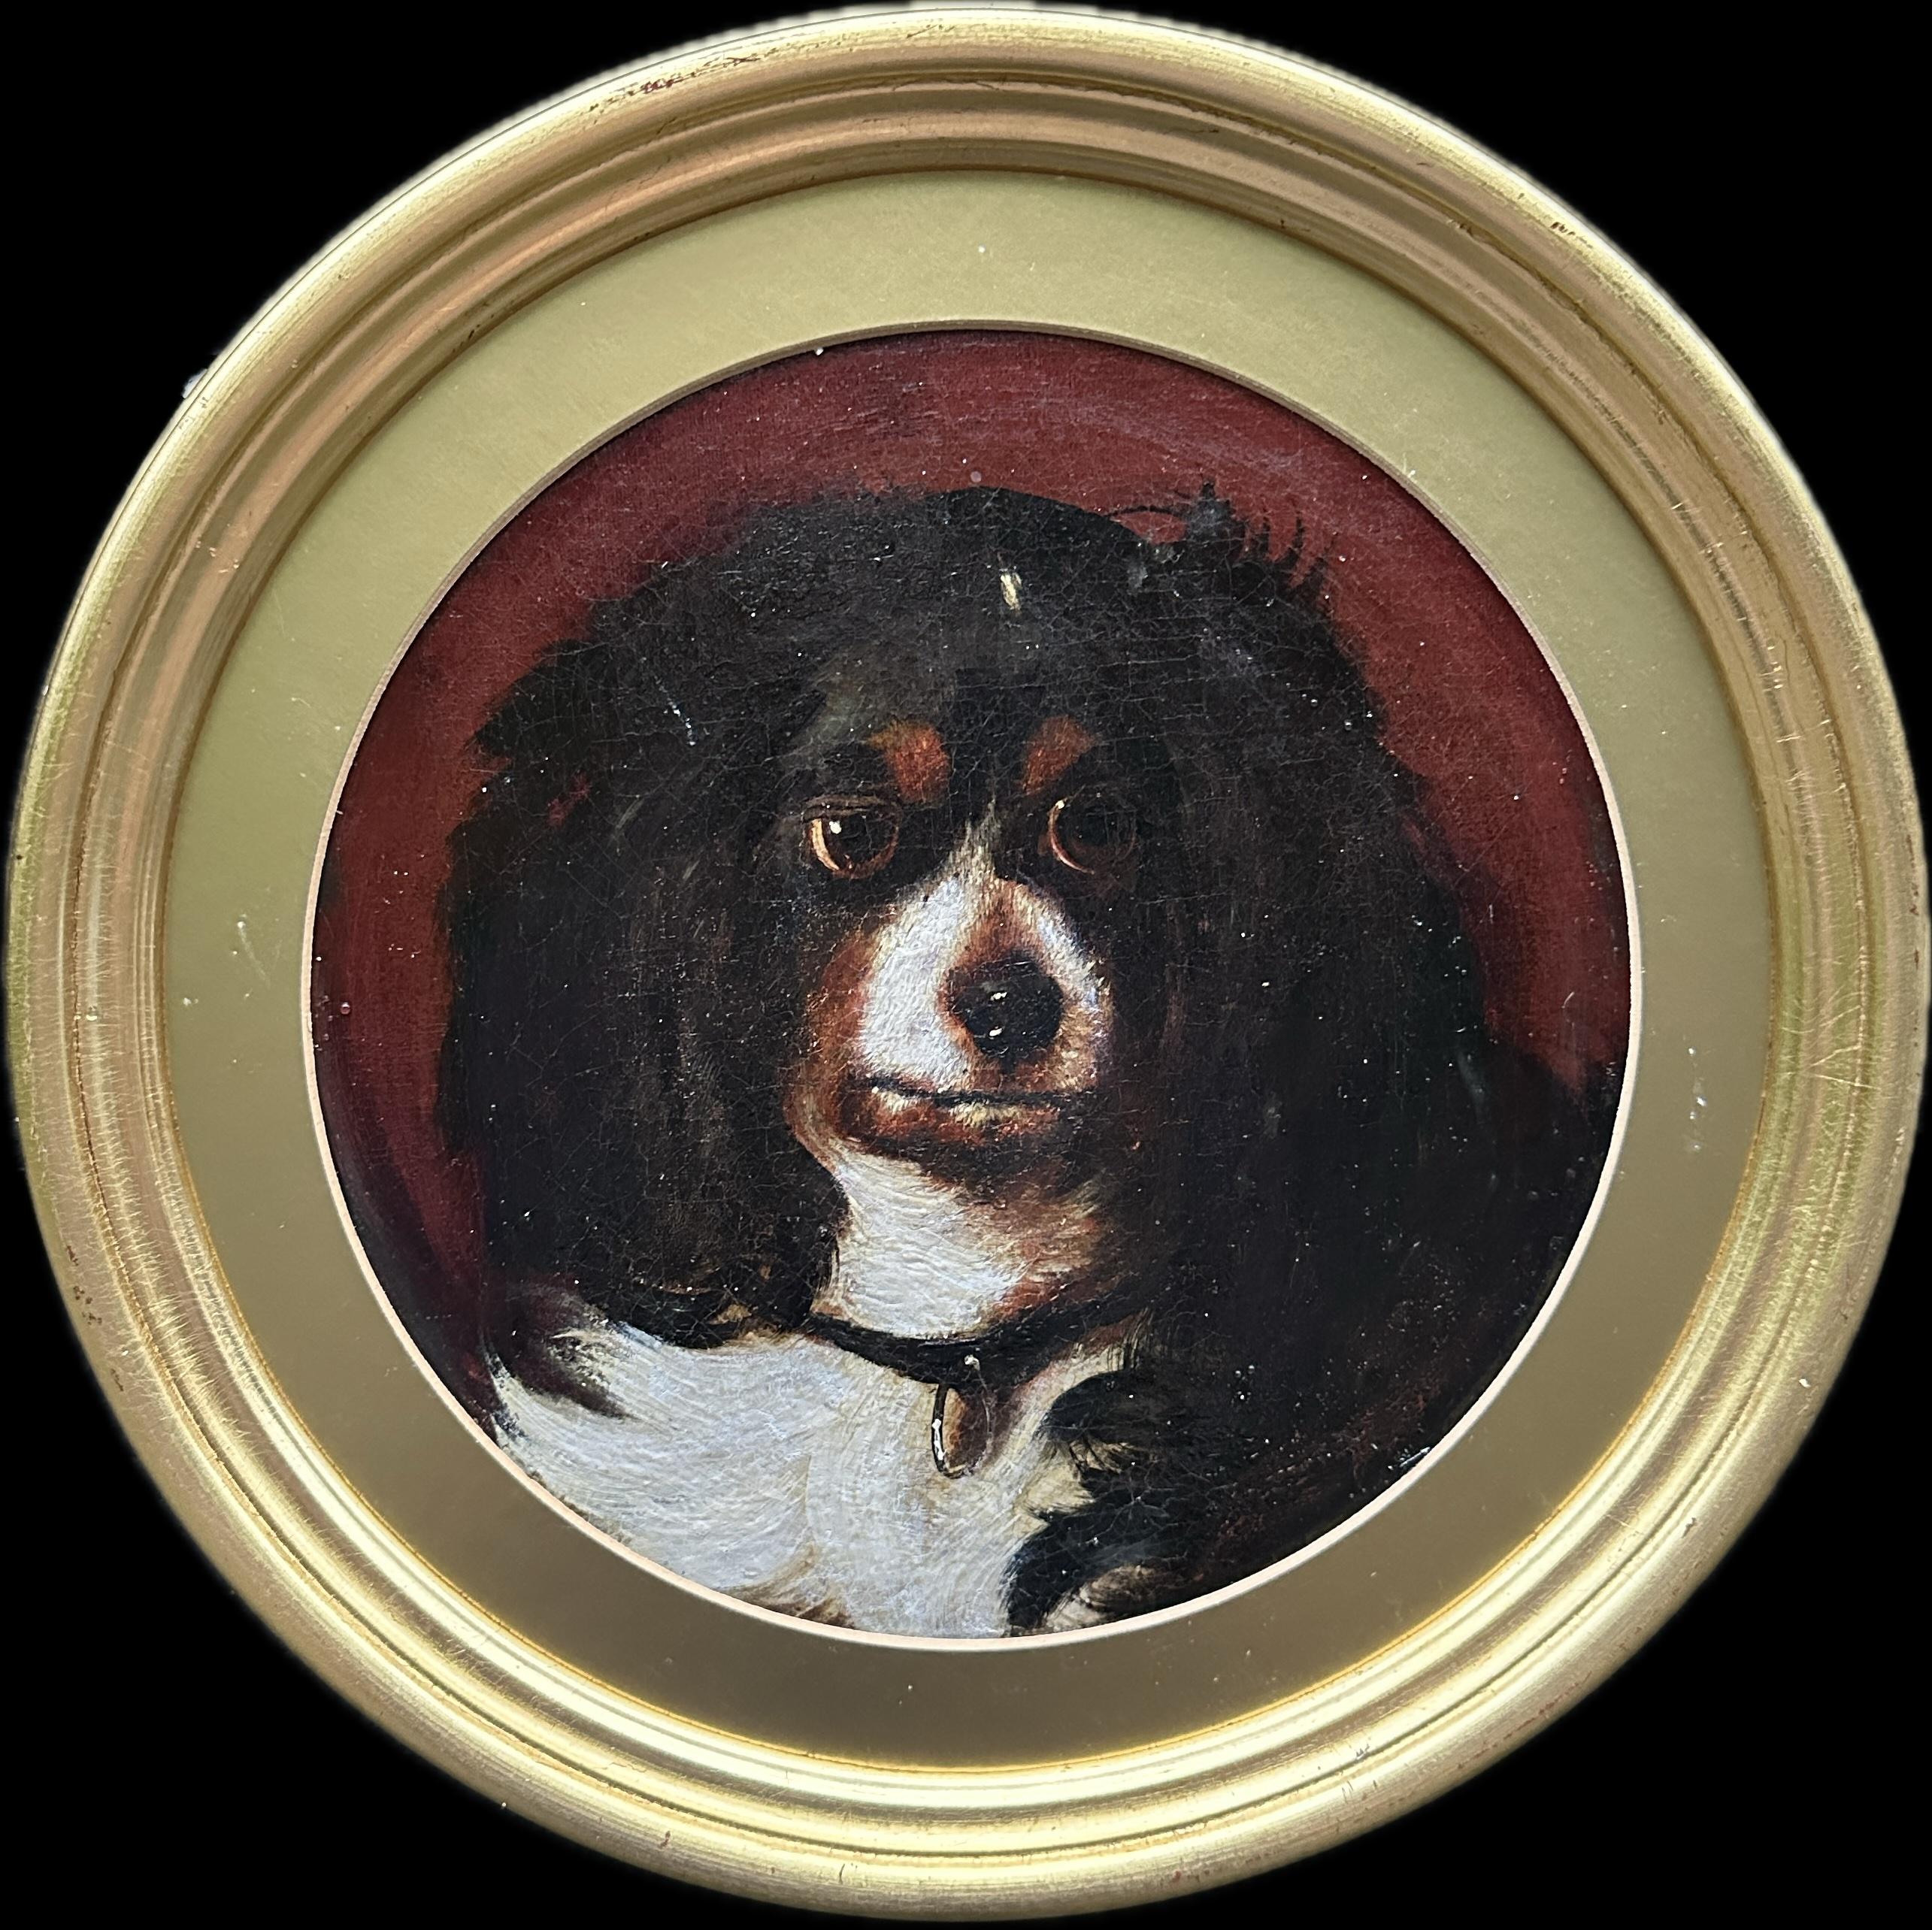 King Charles Cavalier Spaniel, 19th century English portrait of a dogs head For Sale 1